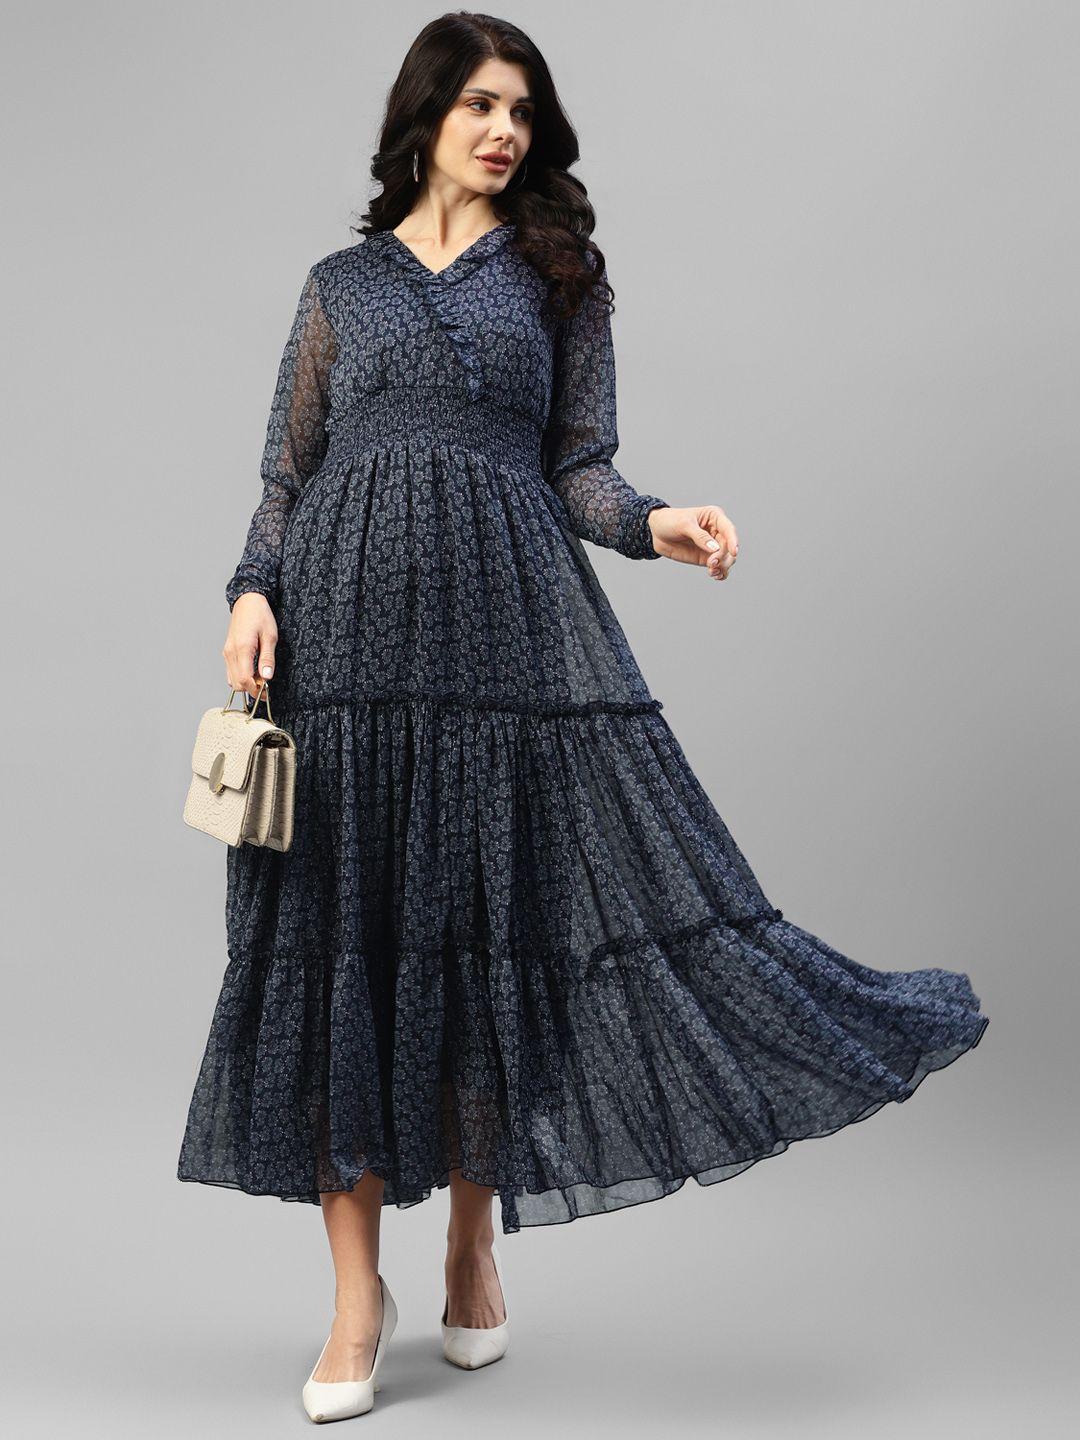 deebaco floral printed puff sleeve tiered chiffon fit and flare midi dress